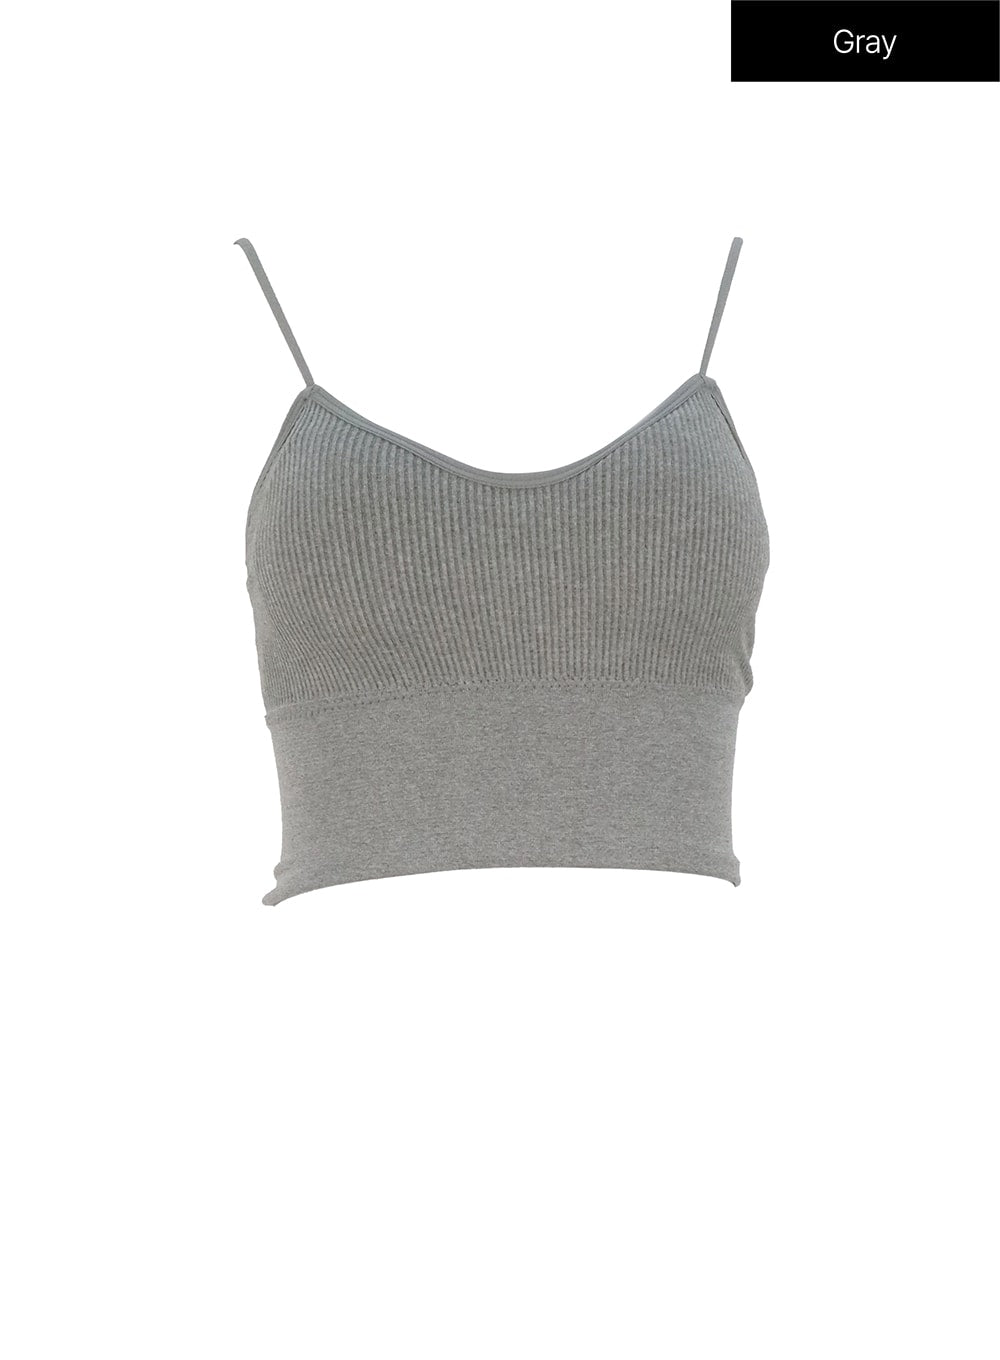 Stylish and Versatile TopShop Ribbed Cropped Cami